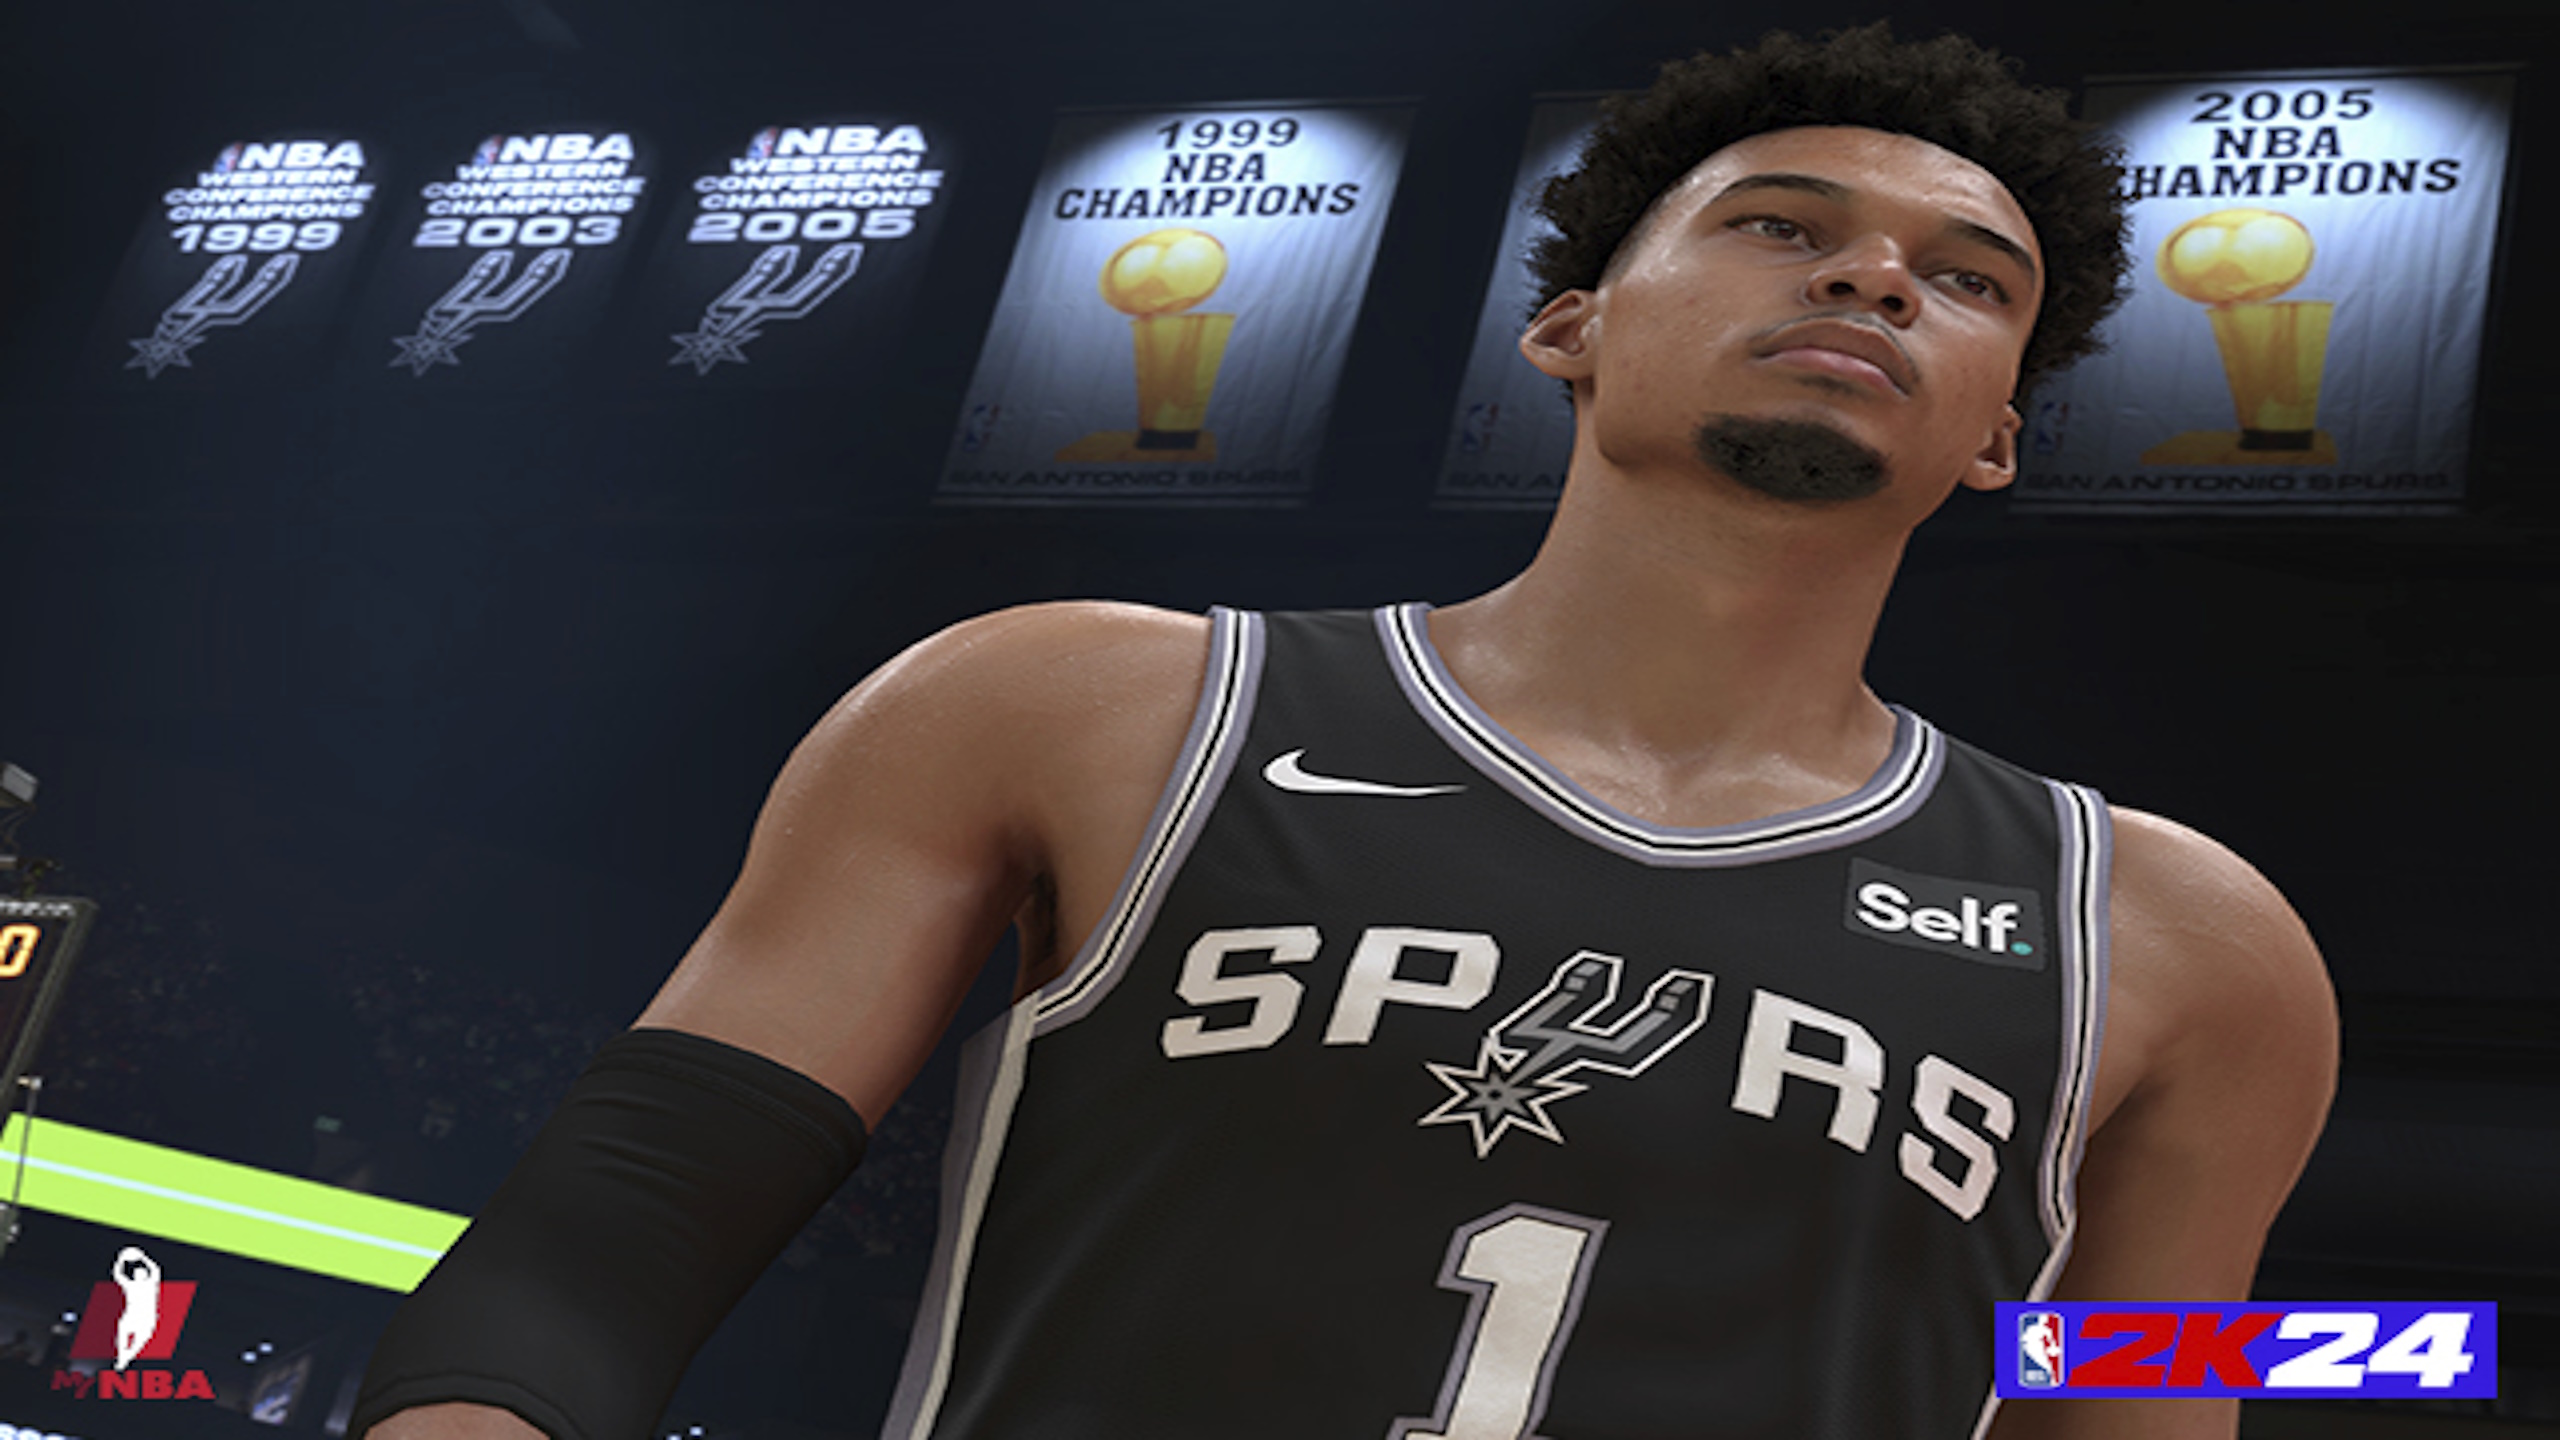 A man is wearing a Spurs #1 jersey while standing on a basketball court with champion pennants all around